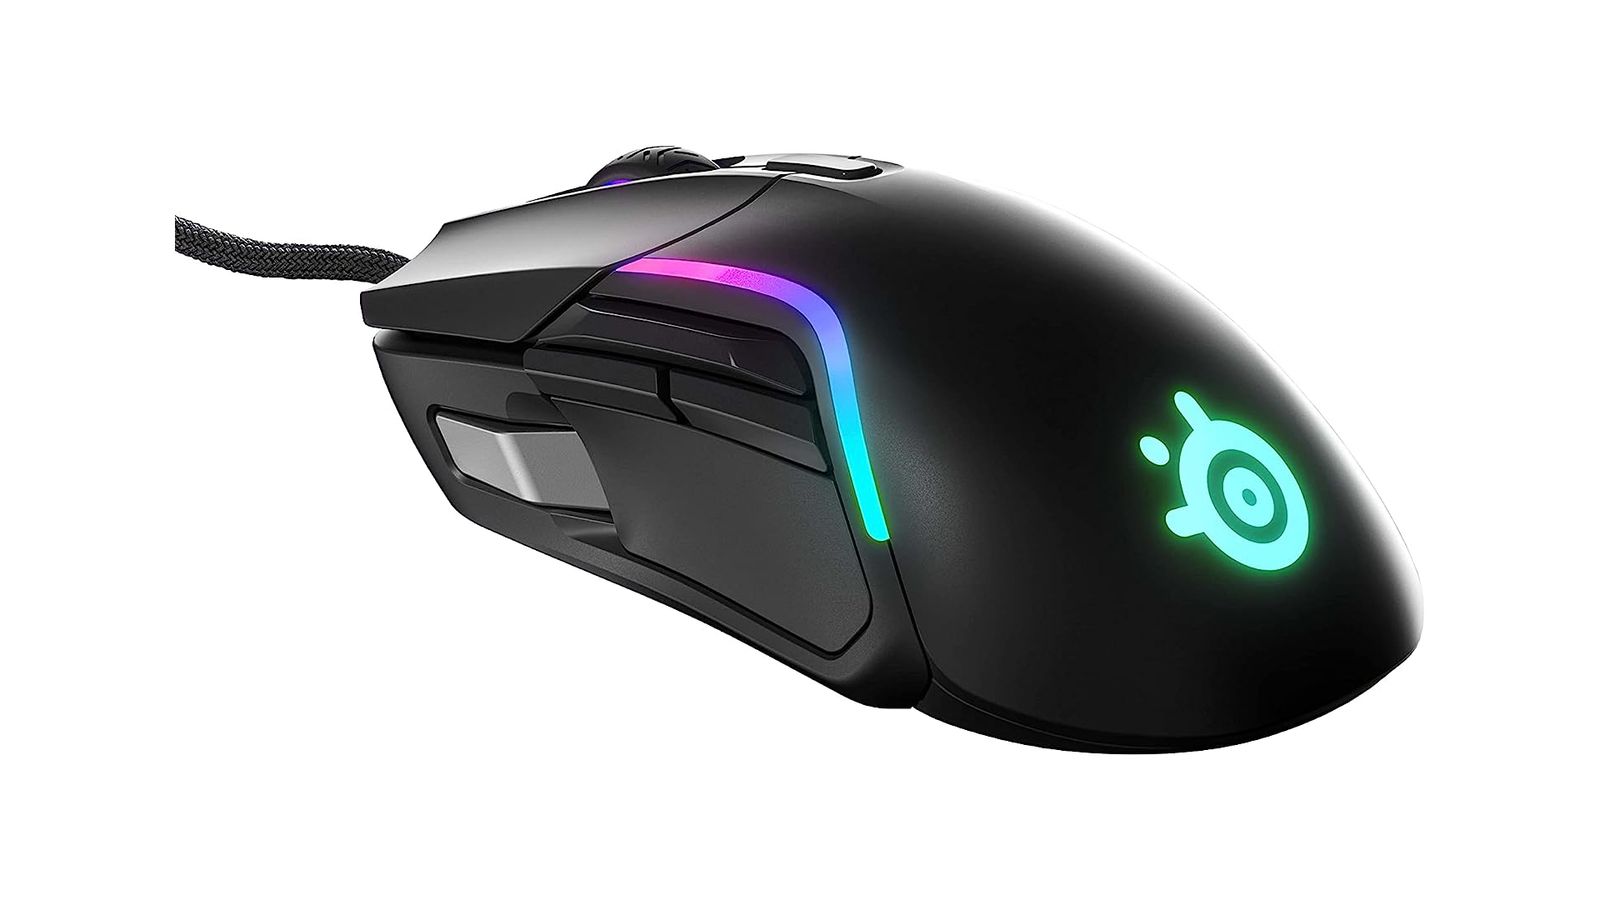 SteelSeries Rival 5 product image of a black wired mouse featuring blue, purple, and pink lighting.